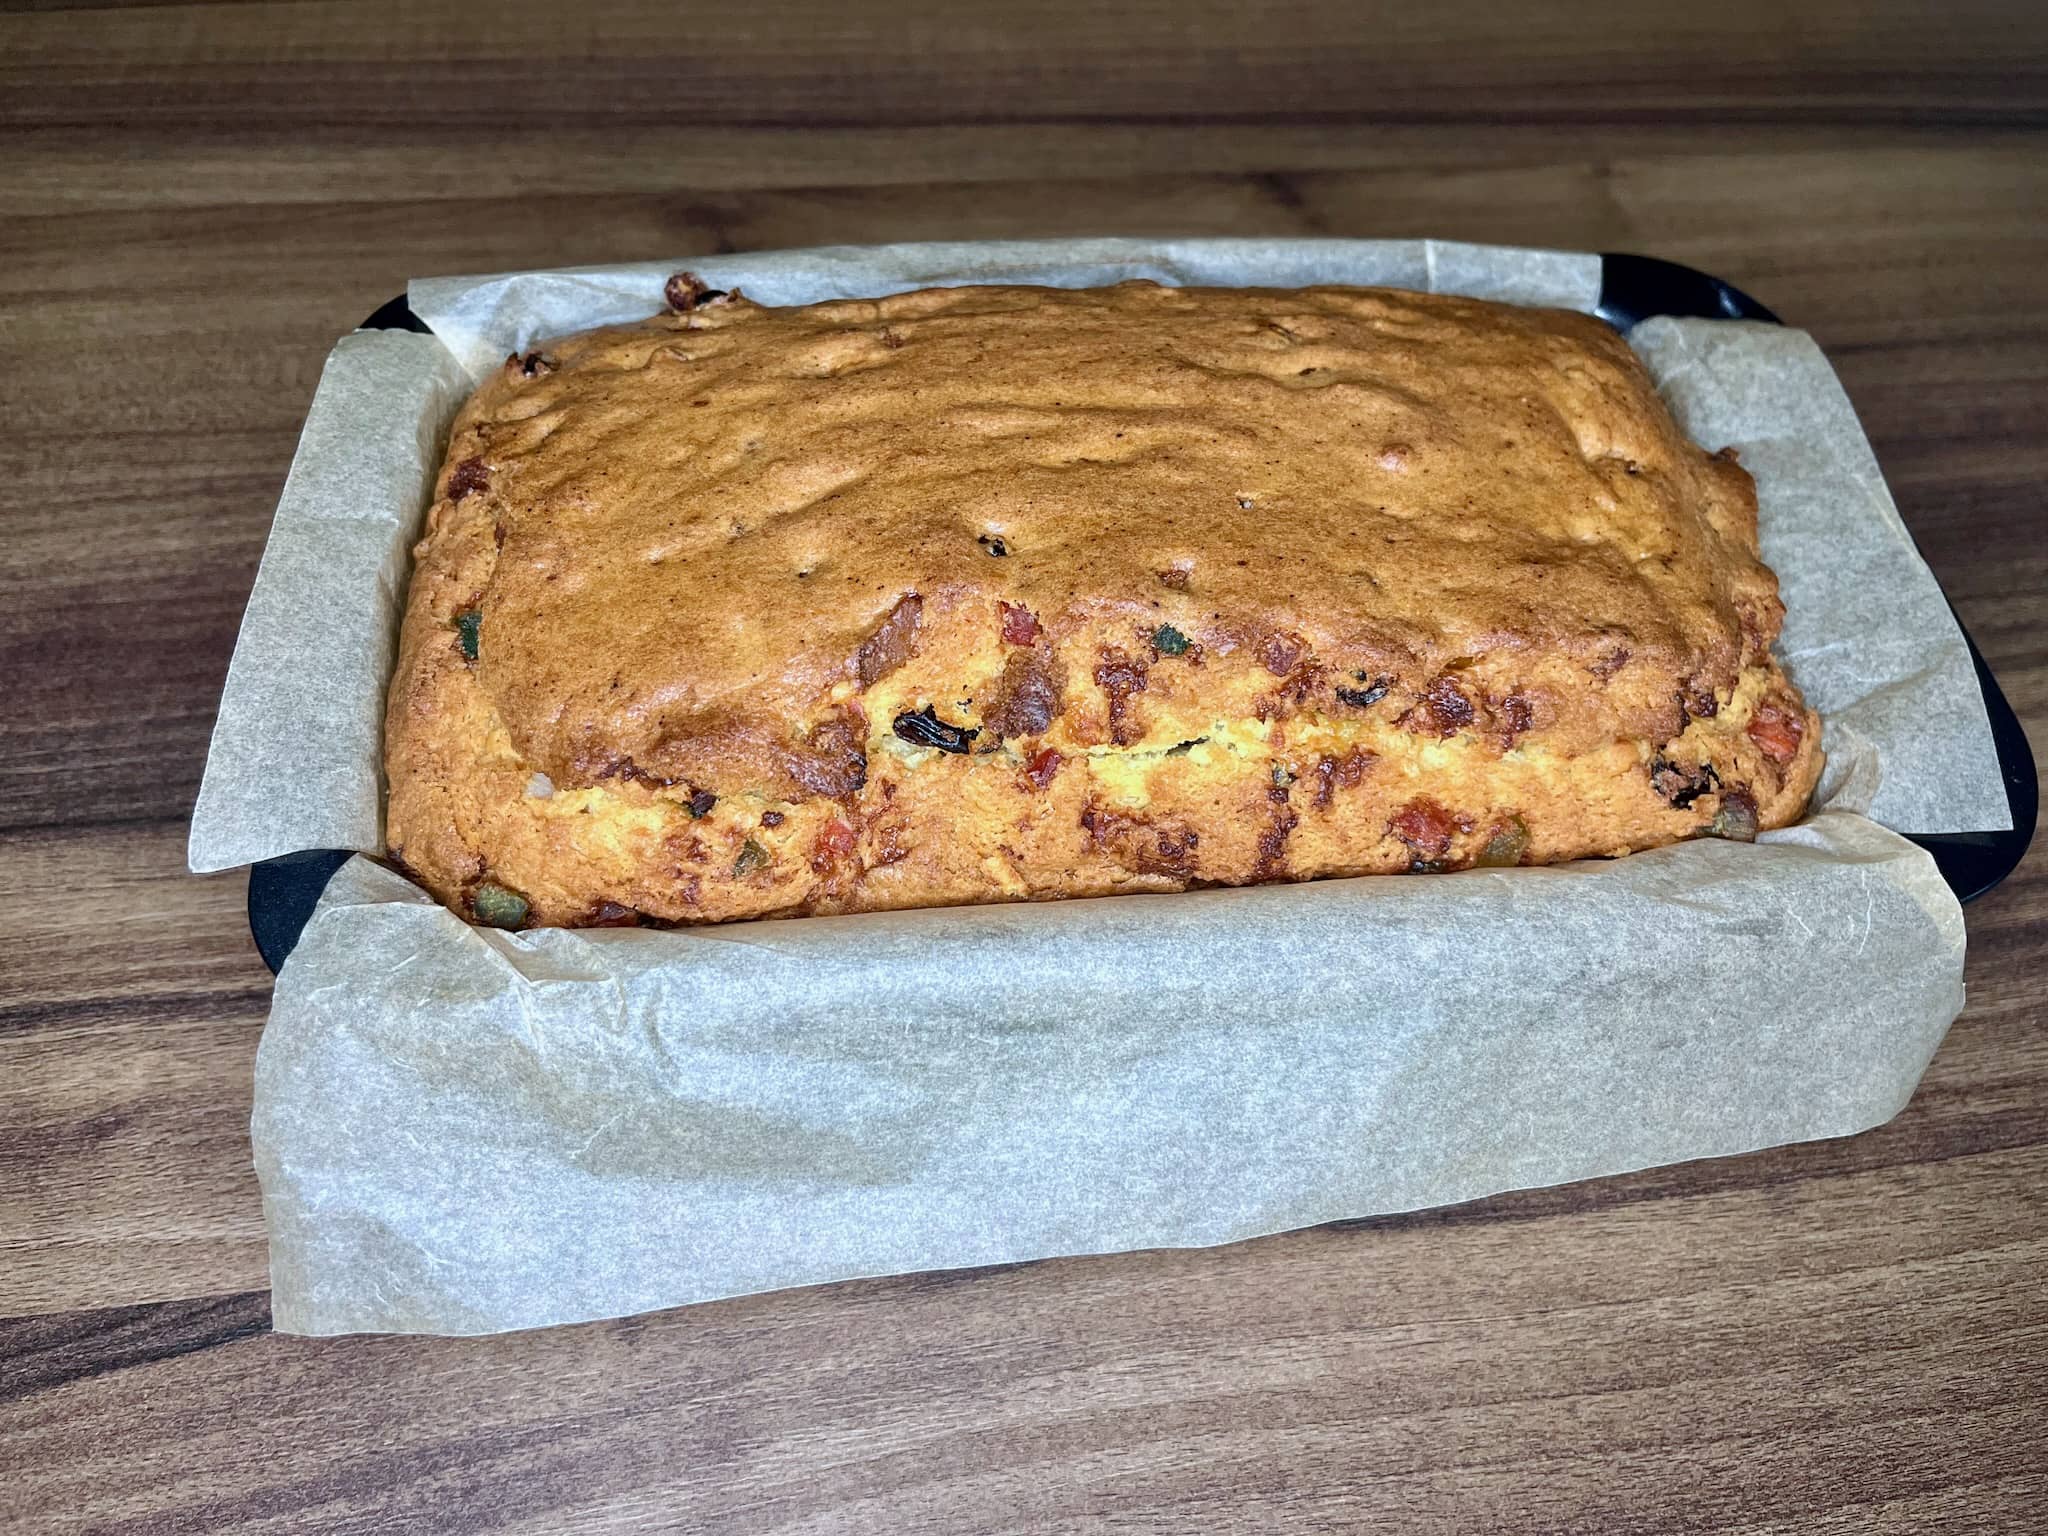 Nicely baked Candied Fruit Loaf Cake straight from the oven